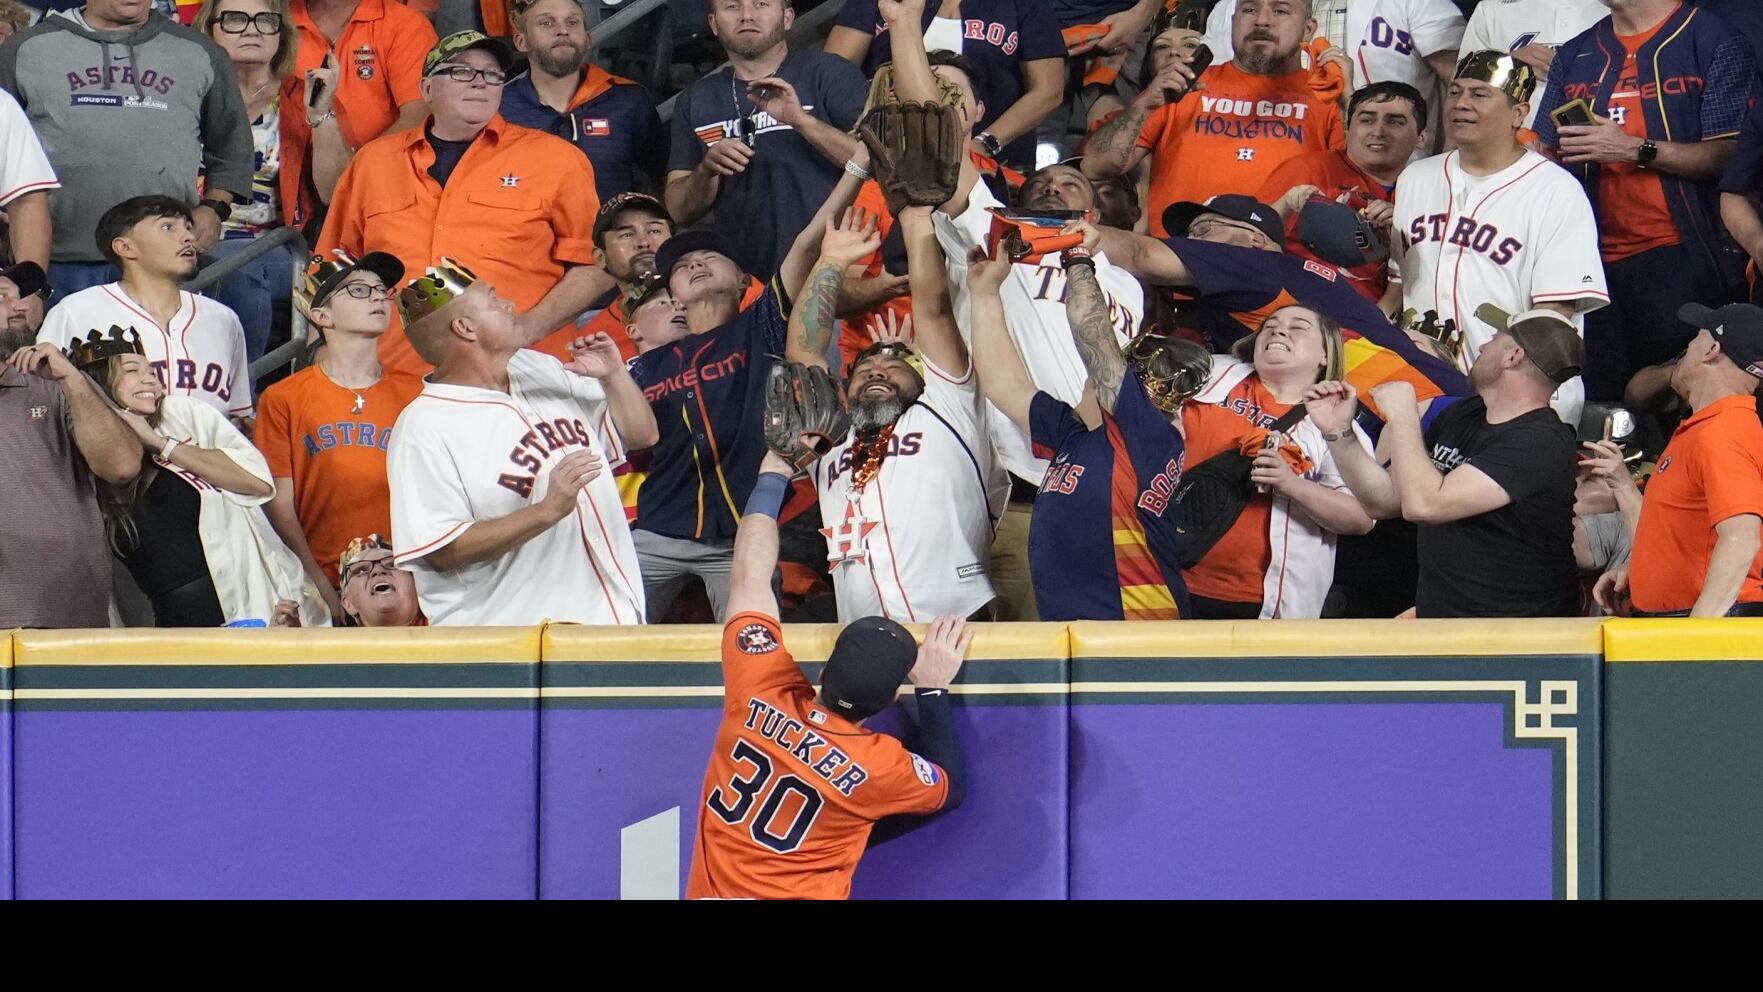 Houston Astros fan captures fight during ALDS Game 1 at Minute